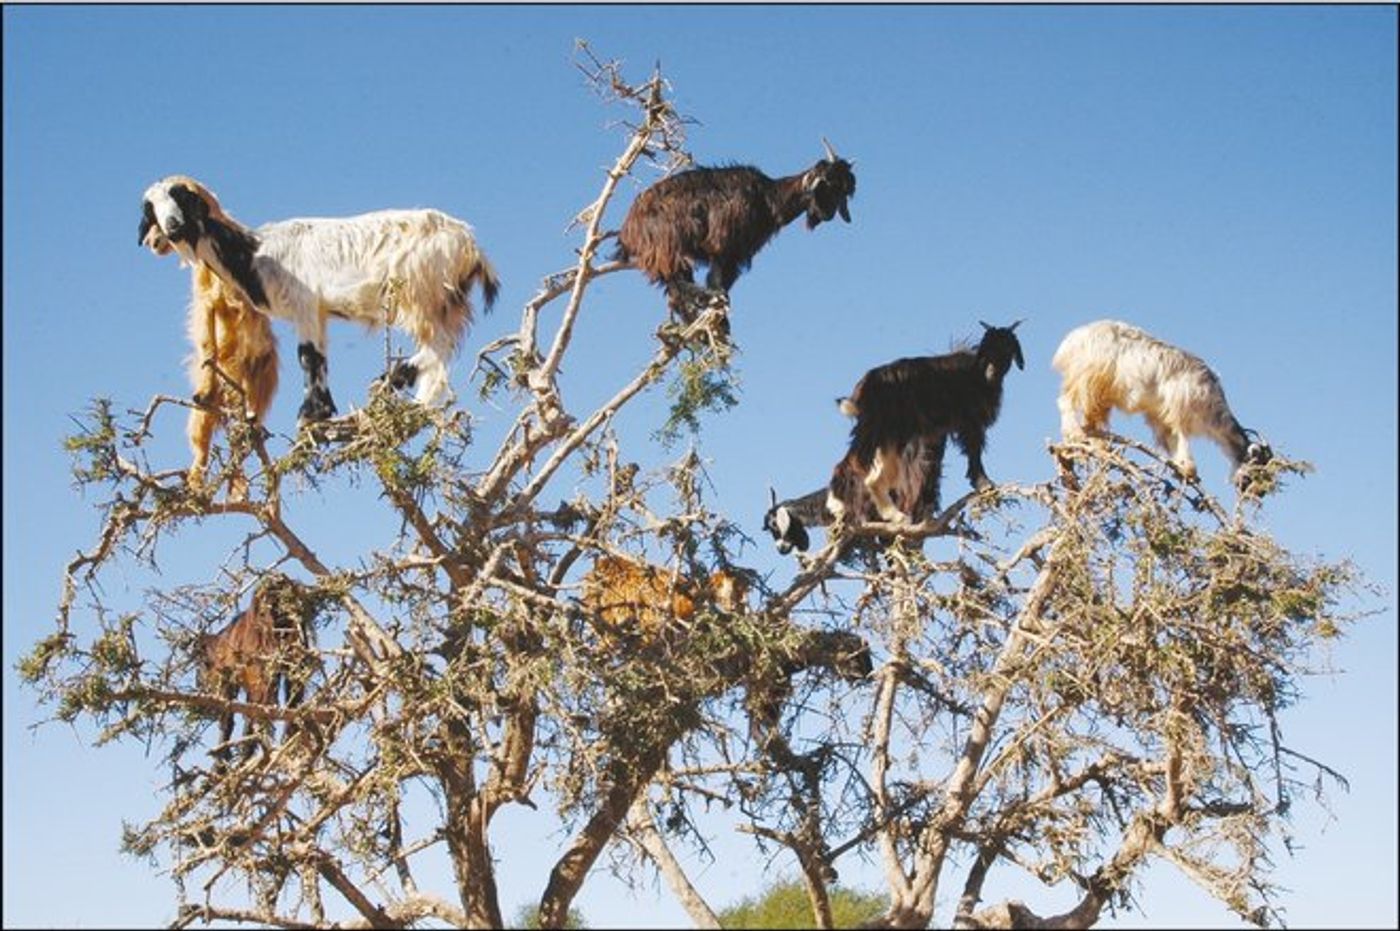 Meet the curious Moroccan goats that climb trees.